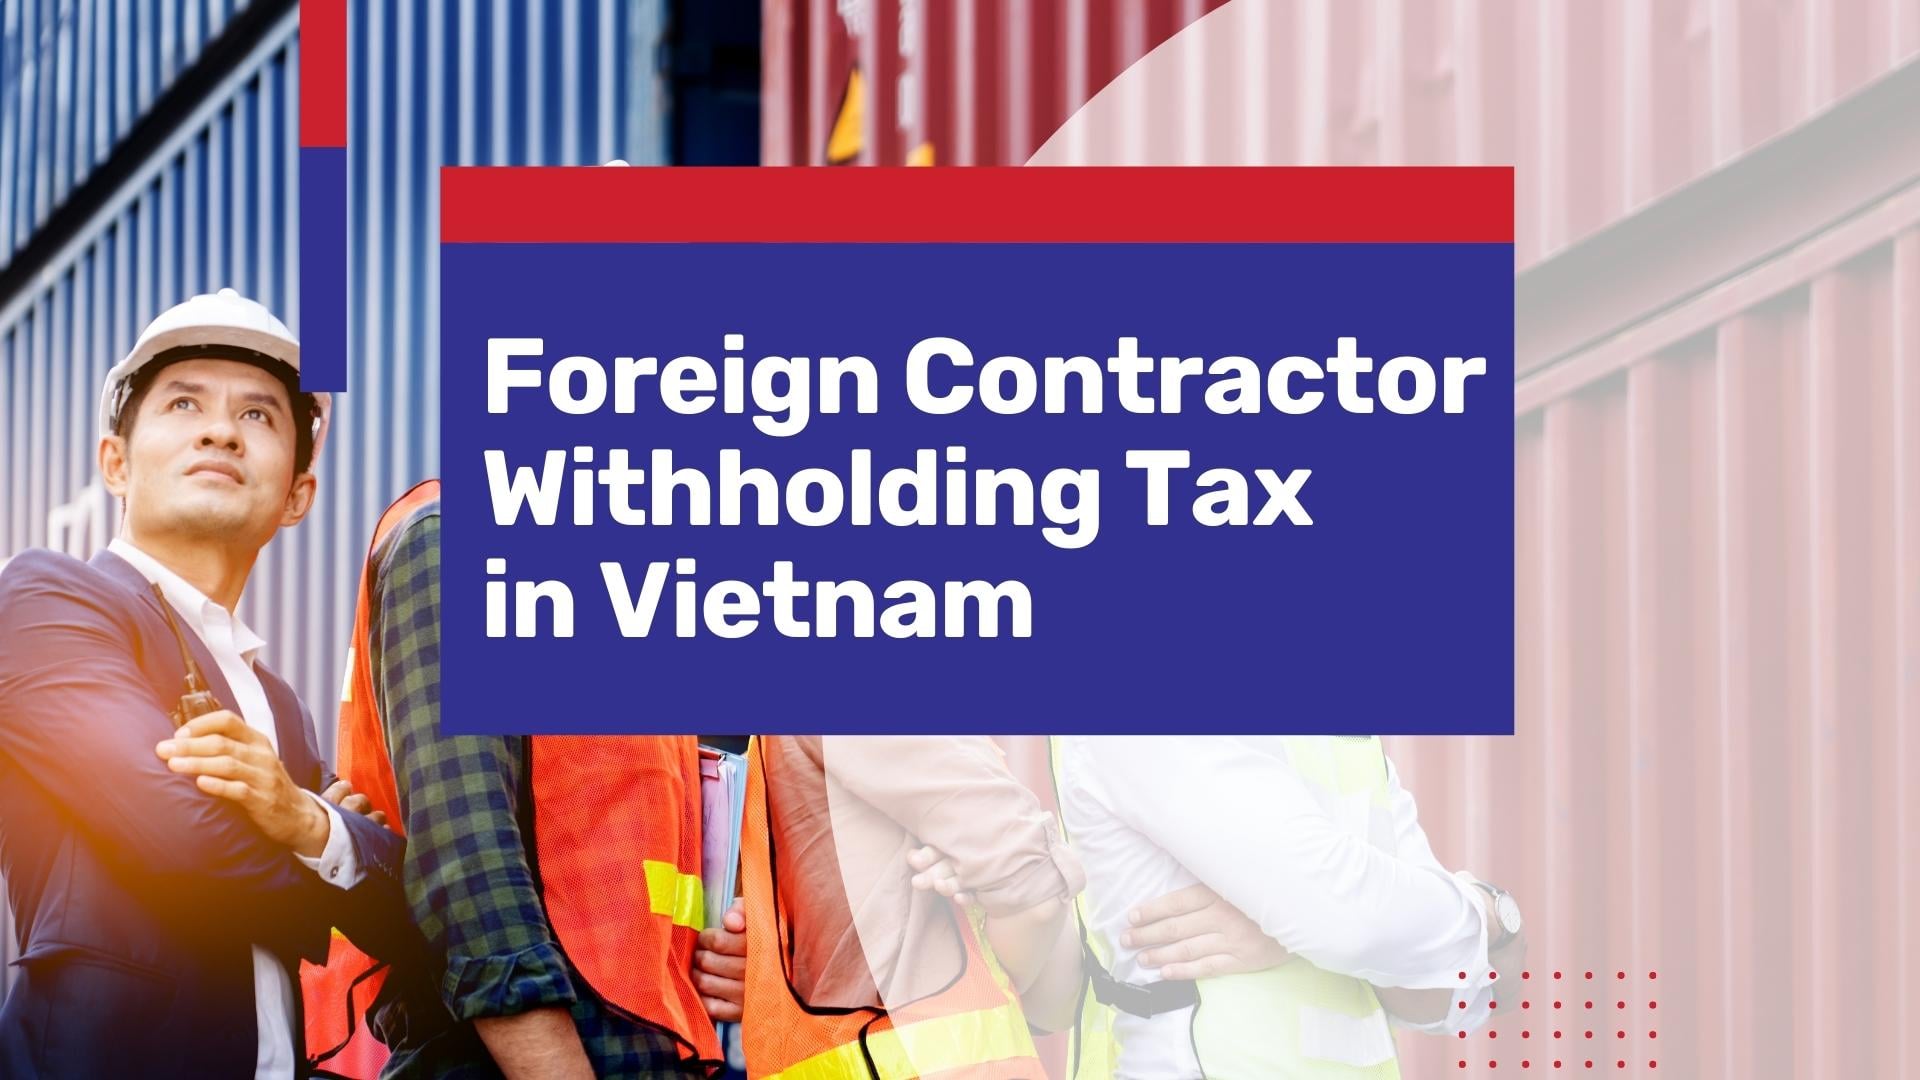 Foreign Contractor Withholding Tax in Vietnam